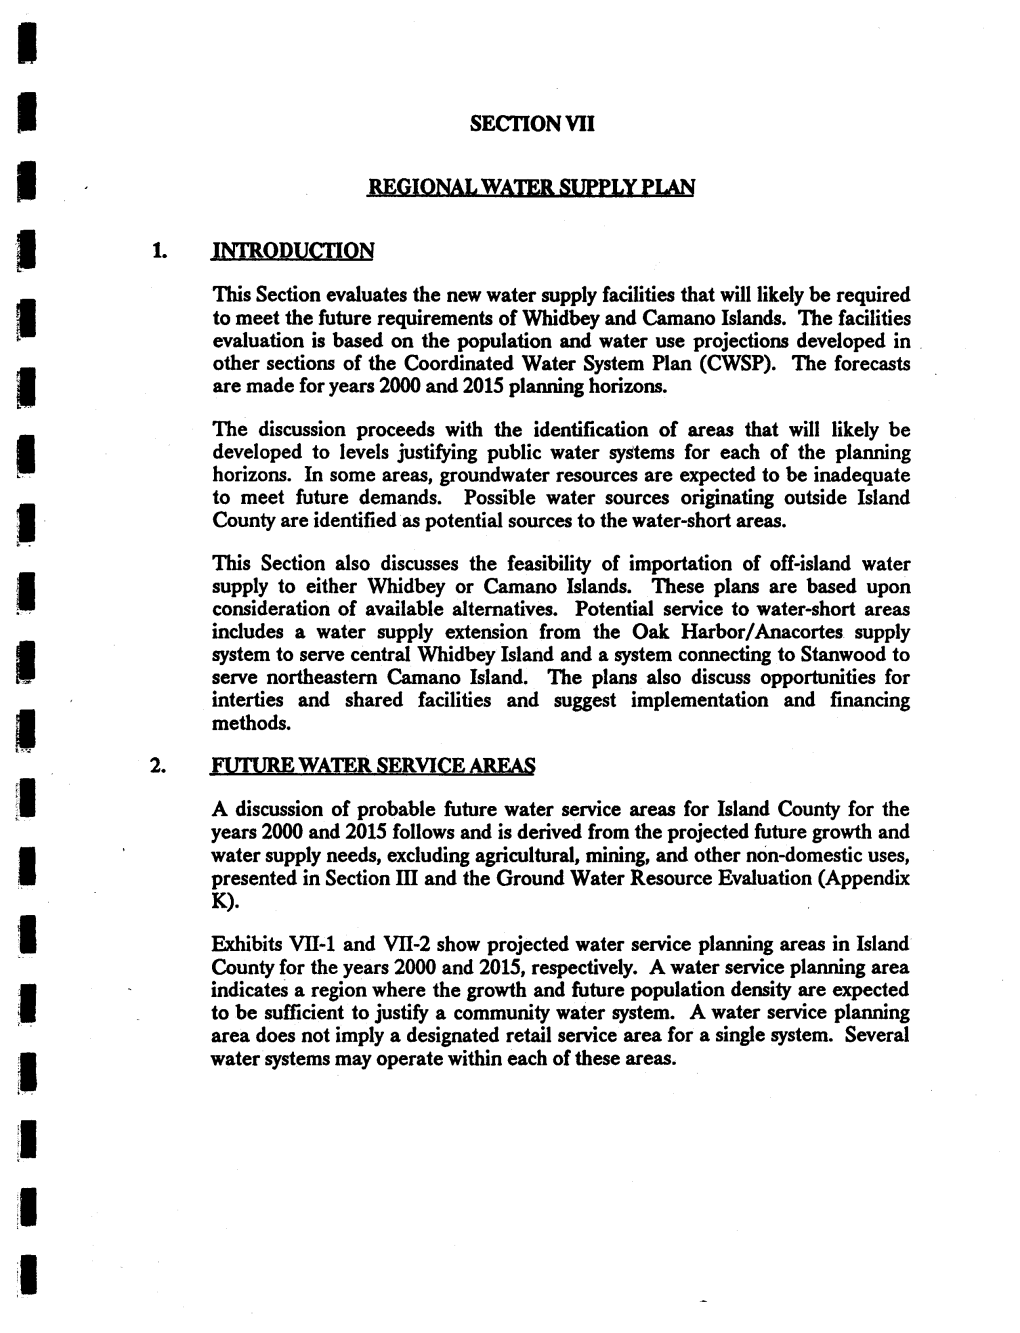 Section VII – Regional Water Supply Plan